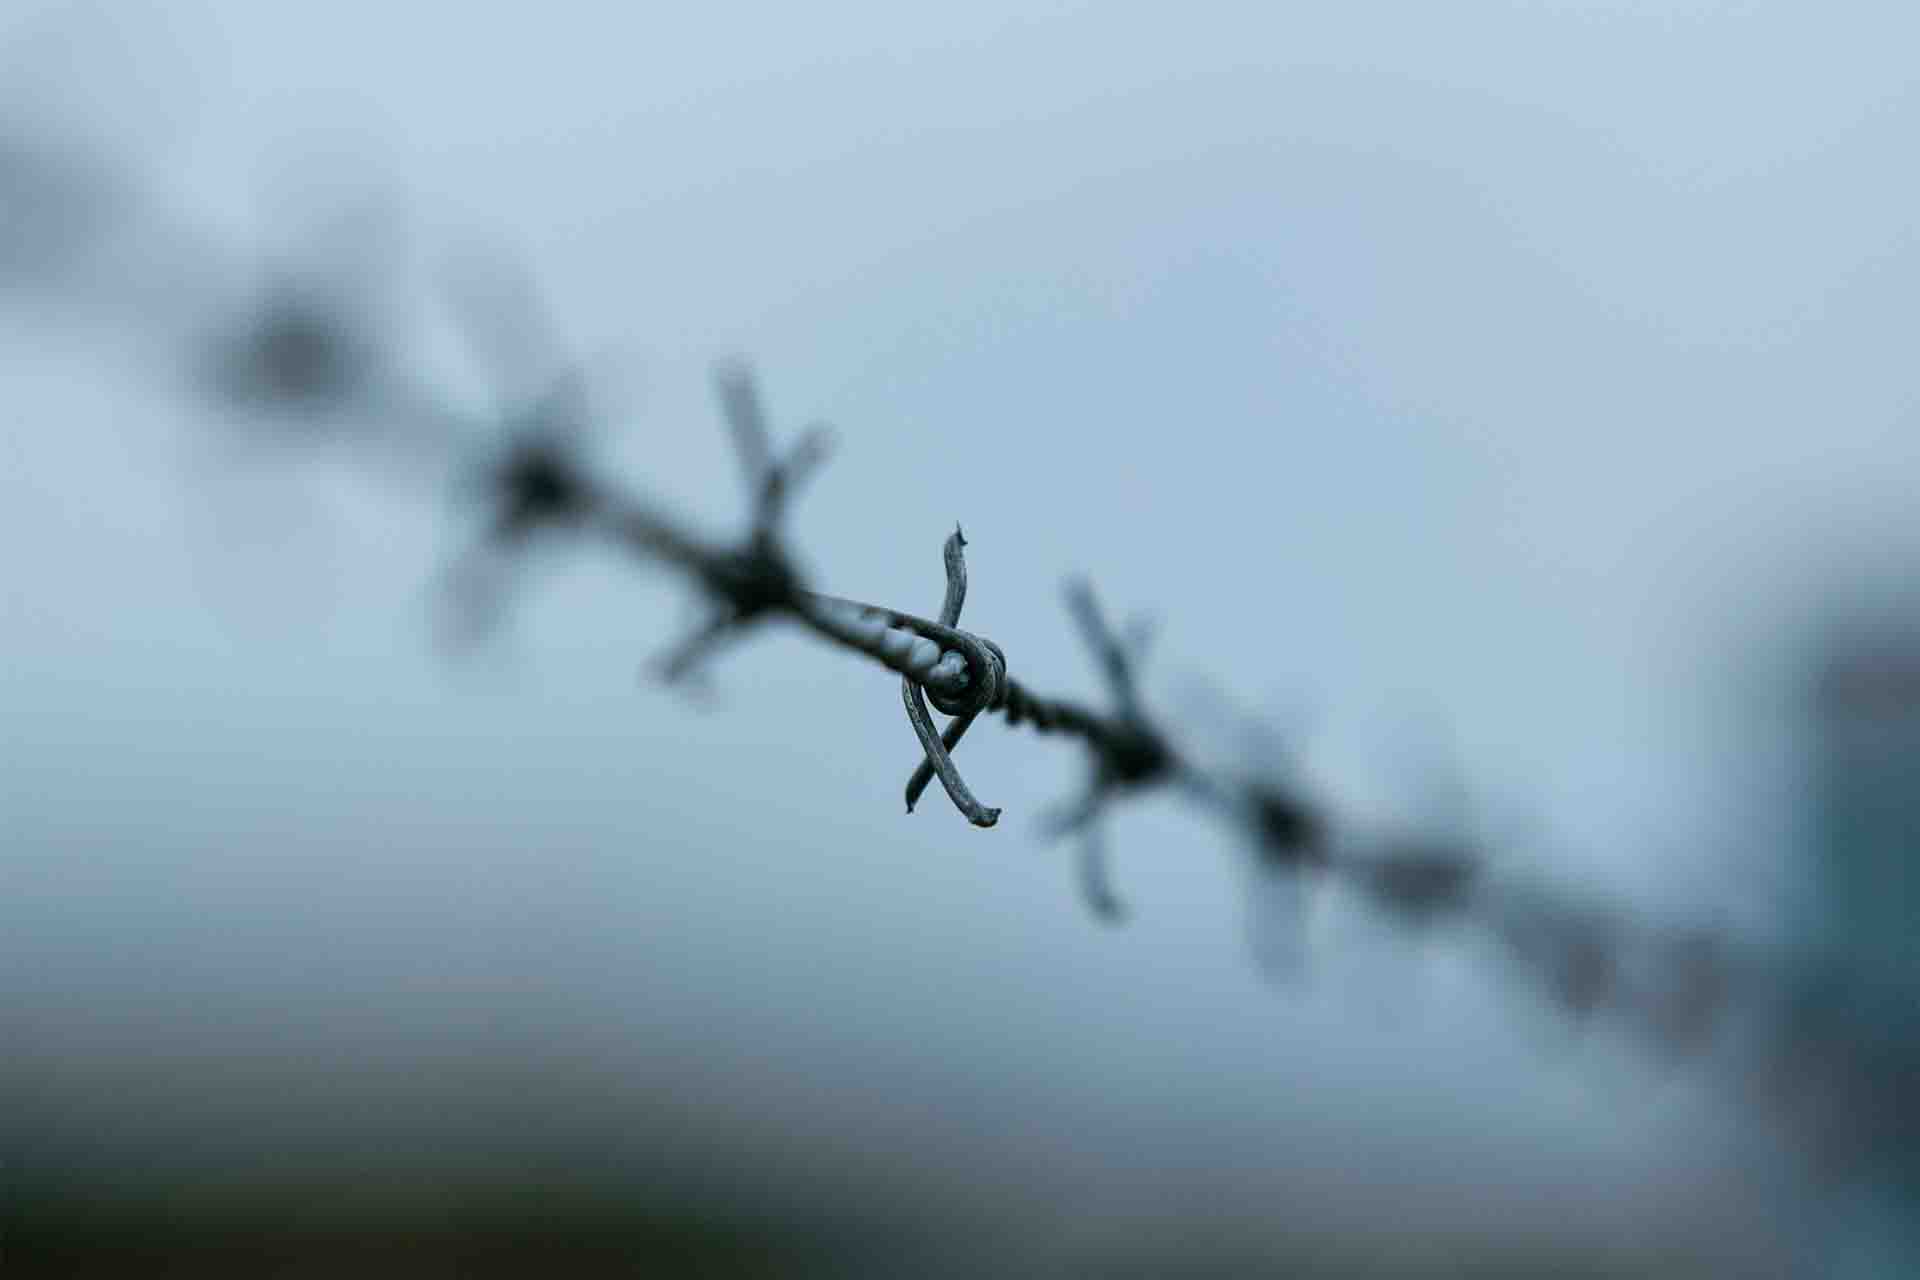 Barbed wire fence on a misty day.